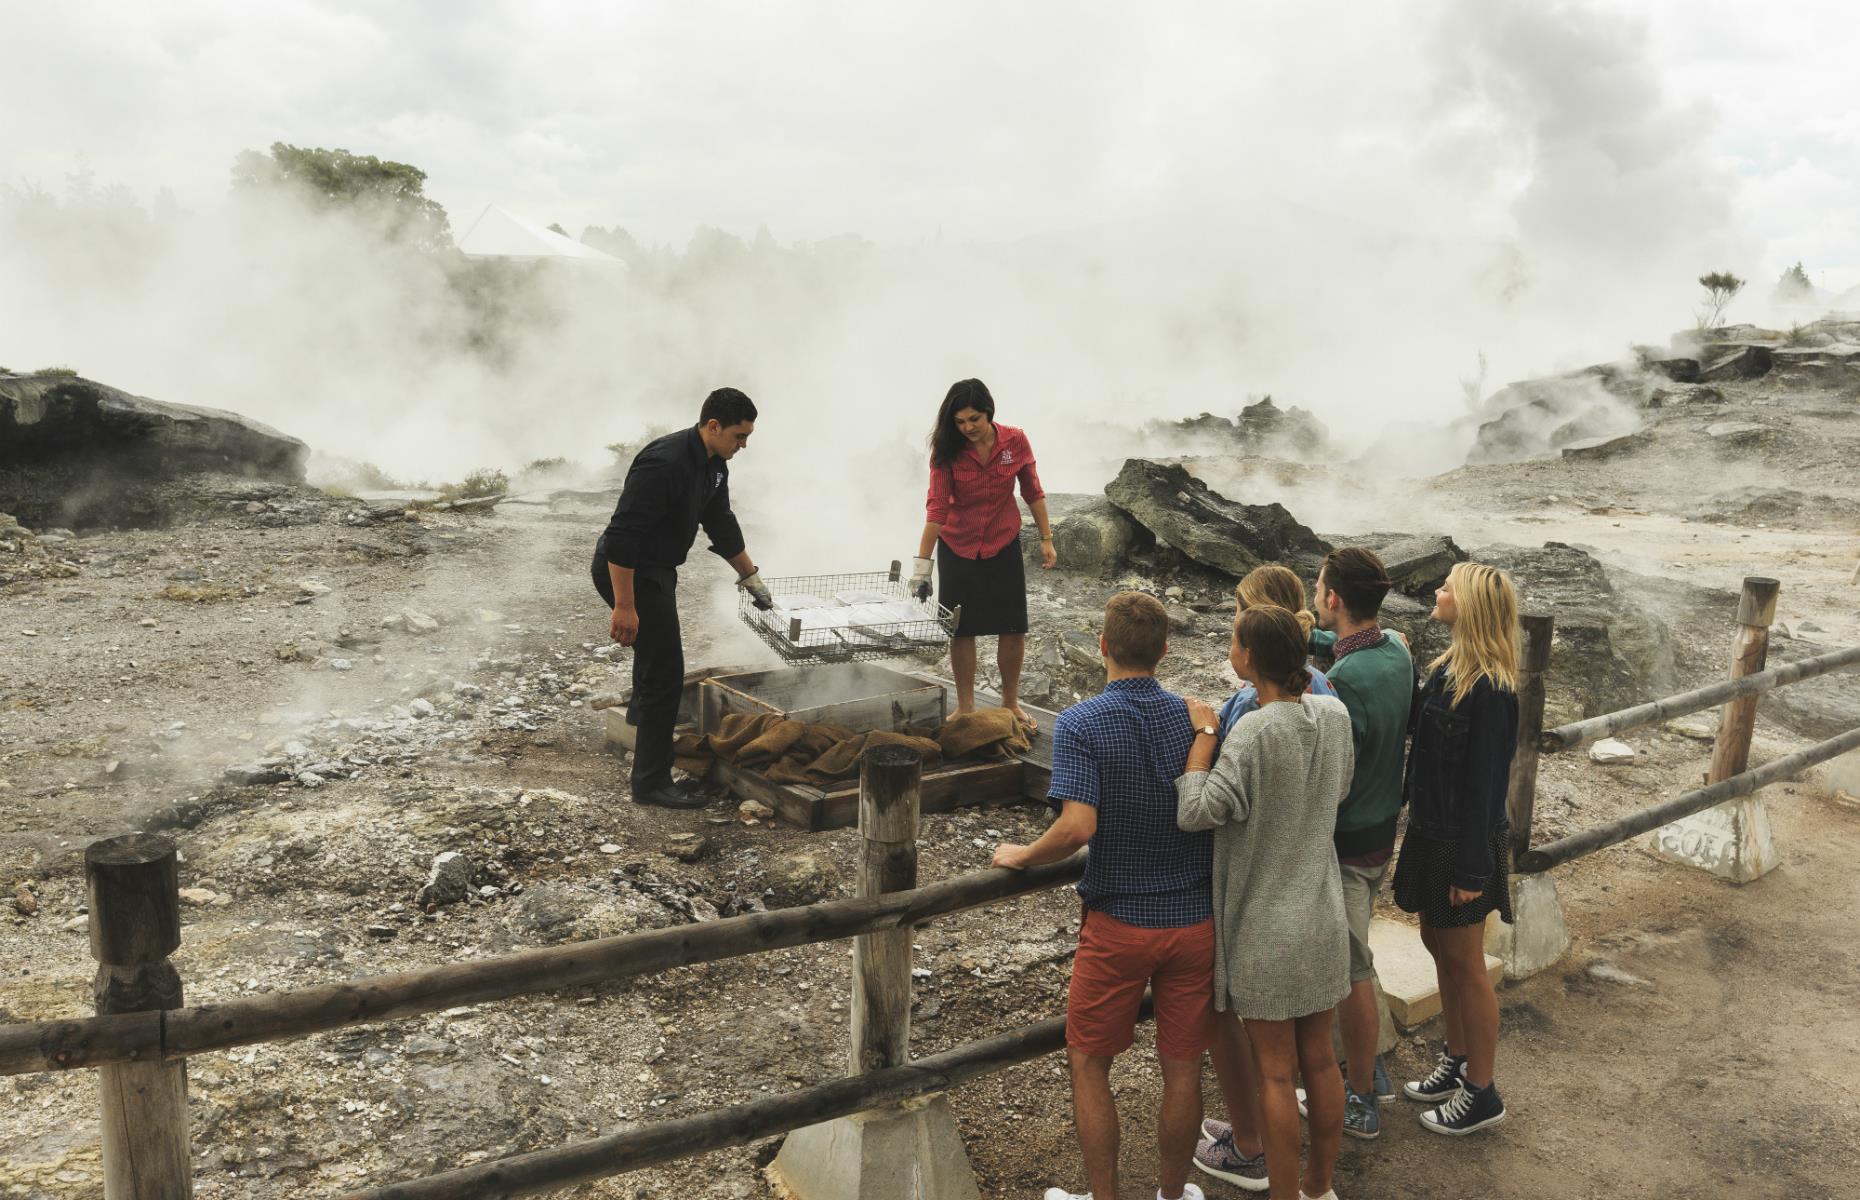 <p>Māori traditionally used the natural geothermal heat of Rotorua as a subterranean oven. At the <a href="https://tepuia.com/">Te Puia</a> Māori cultural centre you can enjoy a hāngi buffet lunch that includes chicken and lamb dishes cooked in a pit dug in the earth. As New Zealand reopens, hāngi experiences are also expected to return at <a href="https://whakarewarewa.com/">Whakarewarewa</a> and <a href="https://www.tamakimaorivillage.co.nz/">Tamaki Māori Village</a>.</p>